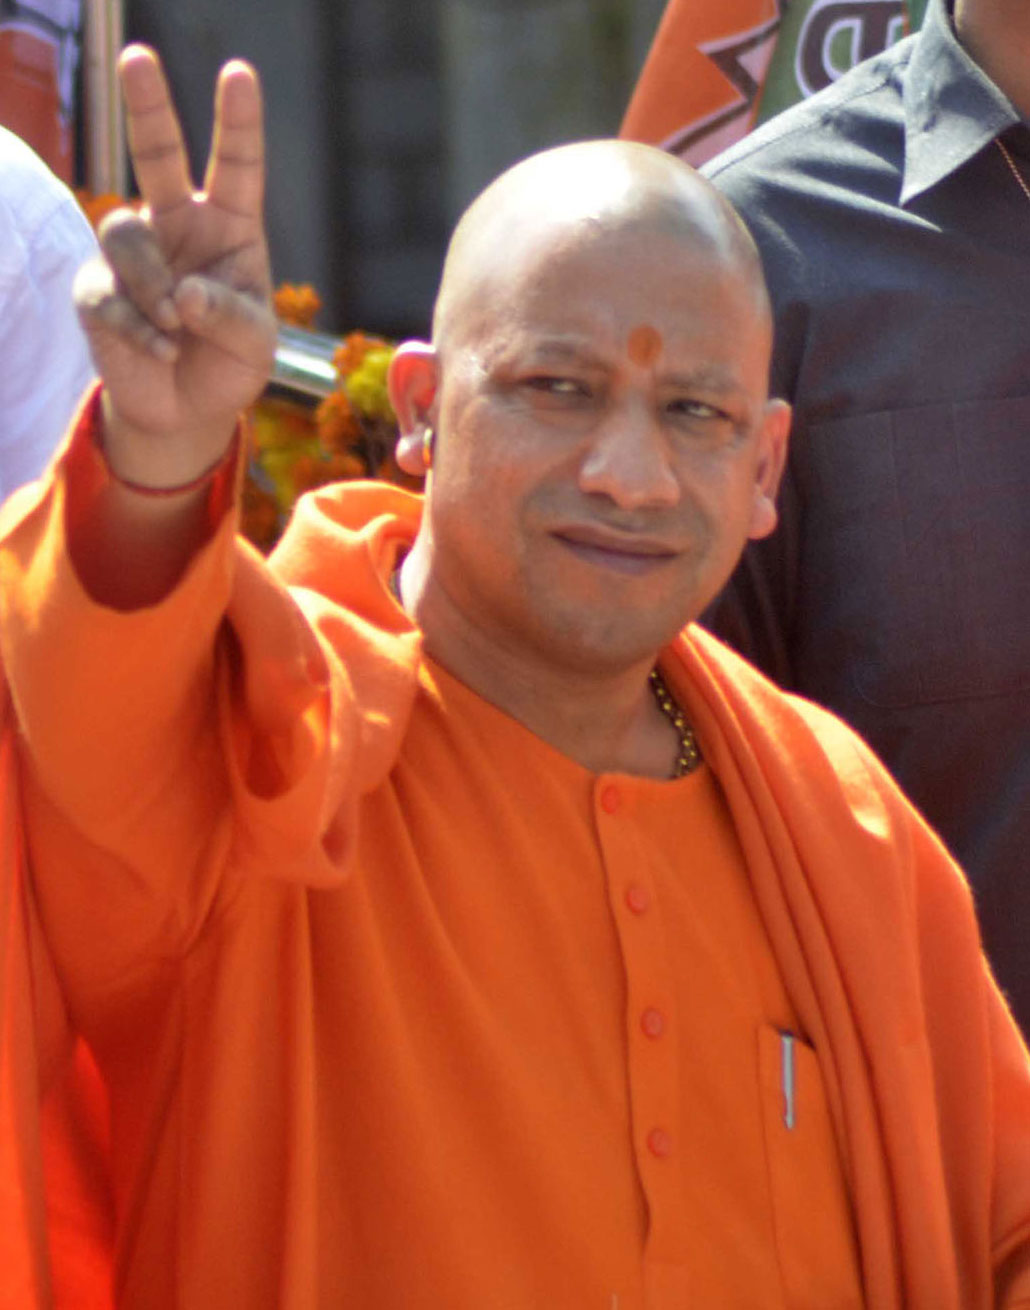 The administration of Uttar Pradesh chief minister Yogi Adityanath has ordered marriage halls in Allahabad to cancel bookings, jeopardising no less than 2,000 marriages, during the Ardh Kumbh celebrations set to begin in January